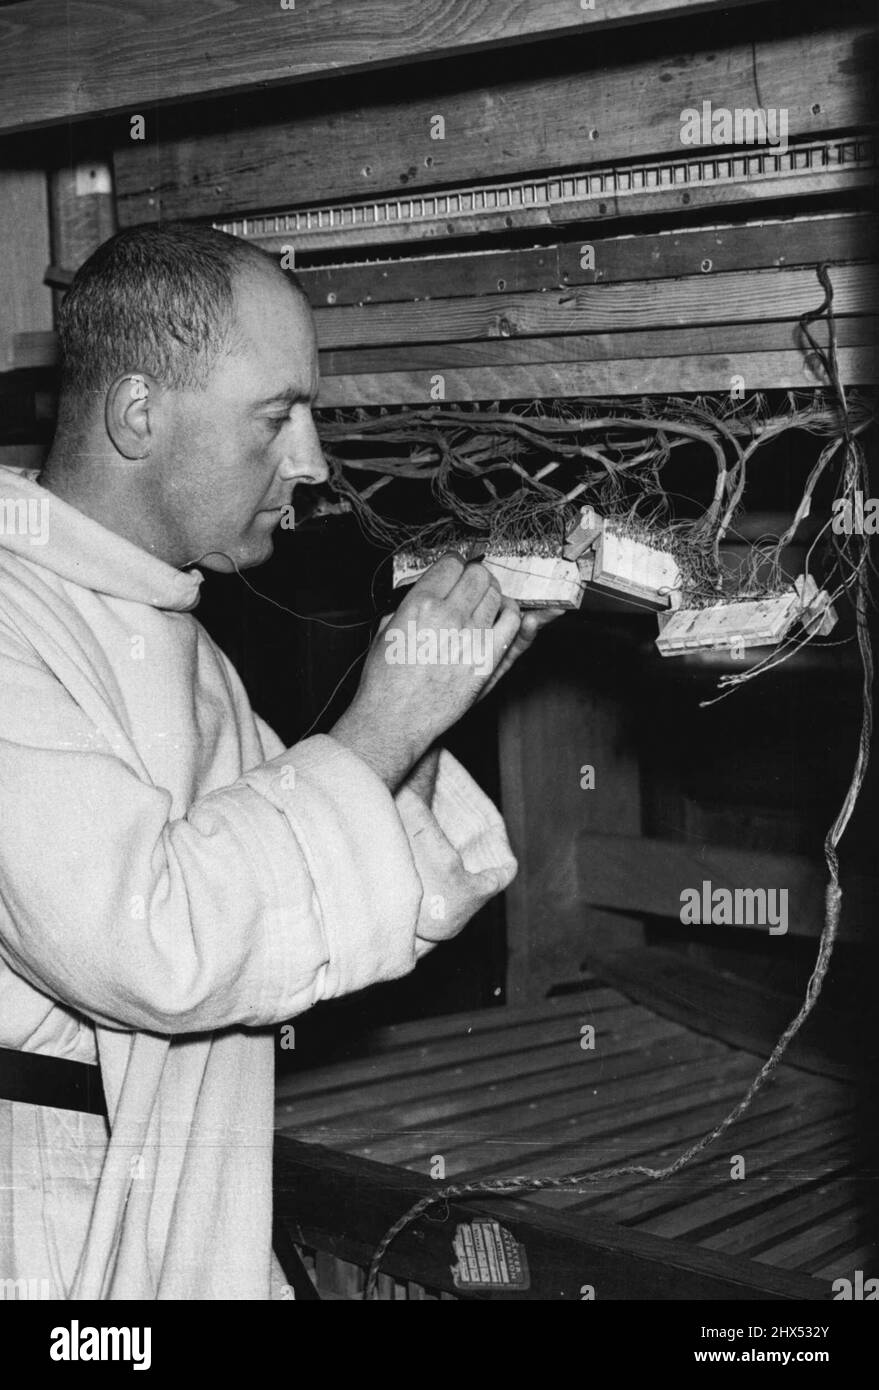 Monk Builds Organ: A close-up of Dom Ethelbert Watson, O.S.B. seen at work on the wiring of the electrical relay system of the nearly completed organ he is building for Prinknash Abbey. When completed, about 19 miles of wire will have been used on the organ.After 4 years work, Dom Ethelbert Watson O.S.B., of Prinknash Abbey, near Gloucester, is nearing completion of a 400 pipe all-electric extension organ, of his own design, for the Abbey Chapel. The electric mechanism is a modern development, but the organ has the tone of the 17th. Century Baroque period. October 15, 1955. (Photo by Fox Photo Stock Photo